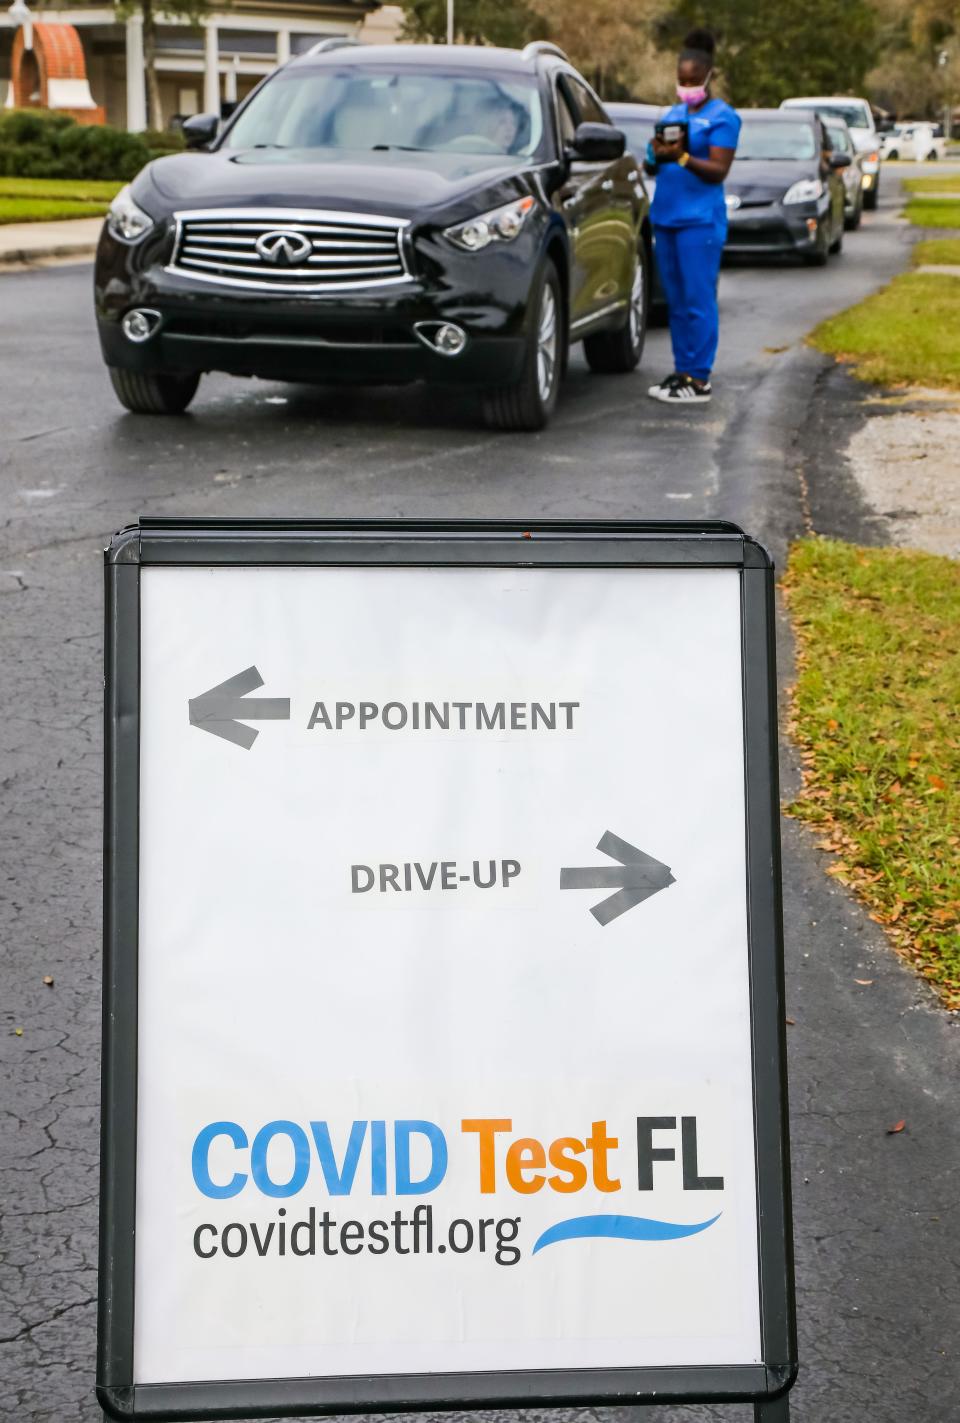 The COVID-19 testing at First Baptist Church of Ocala on Jan. 5, 2021.